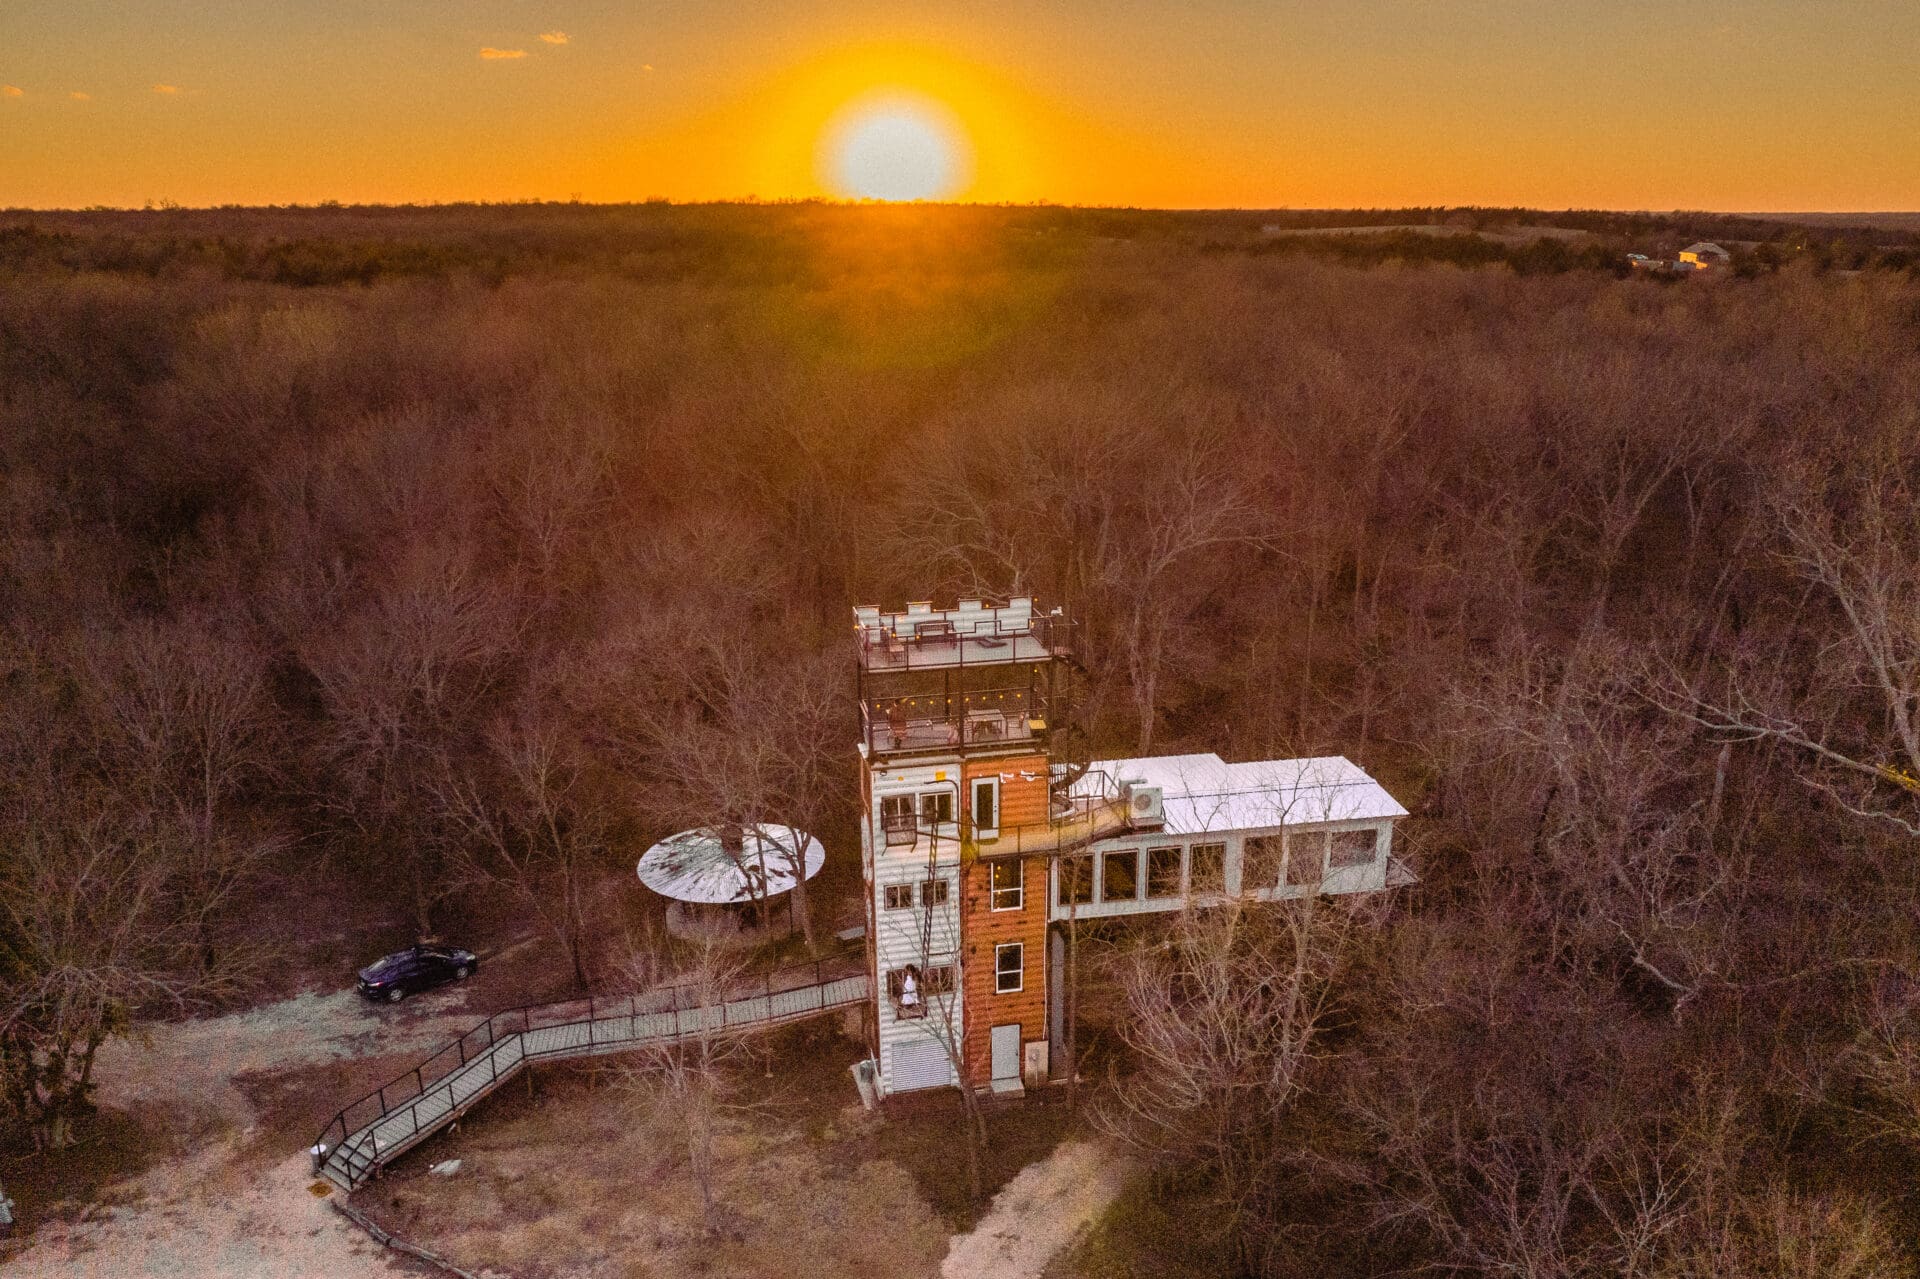 The Air Castle at Highpoint Treehouses in Ladonia, TX